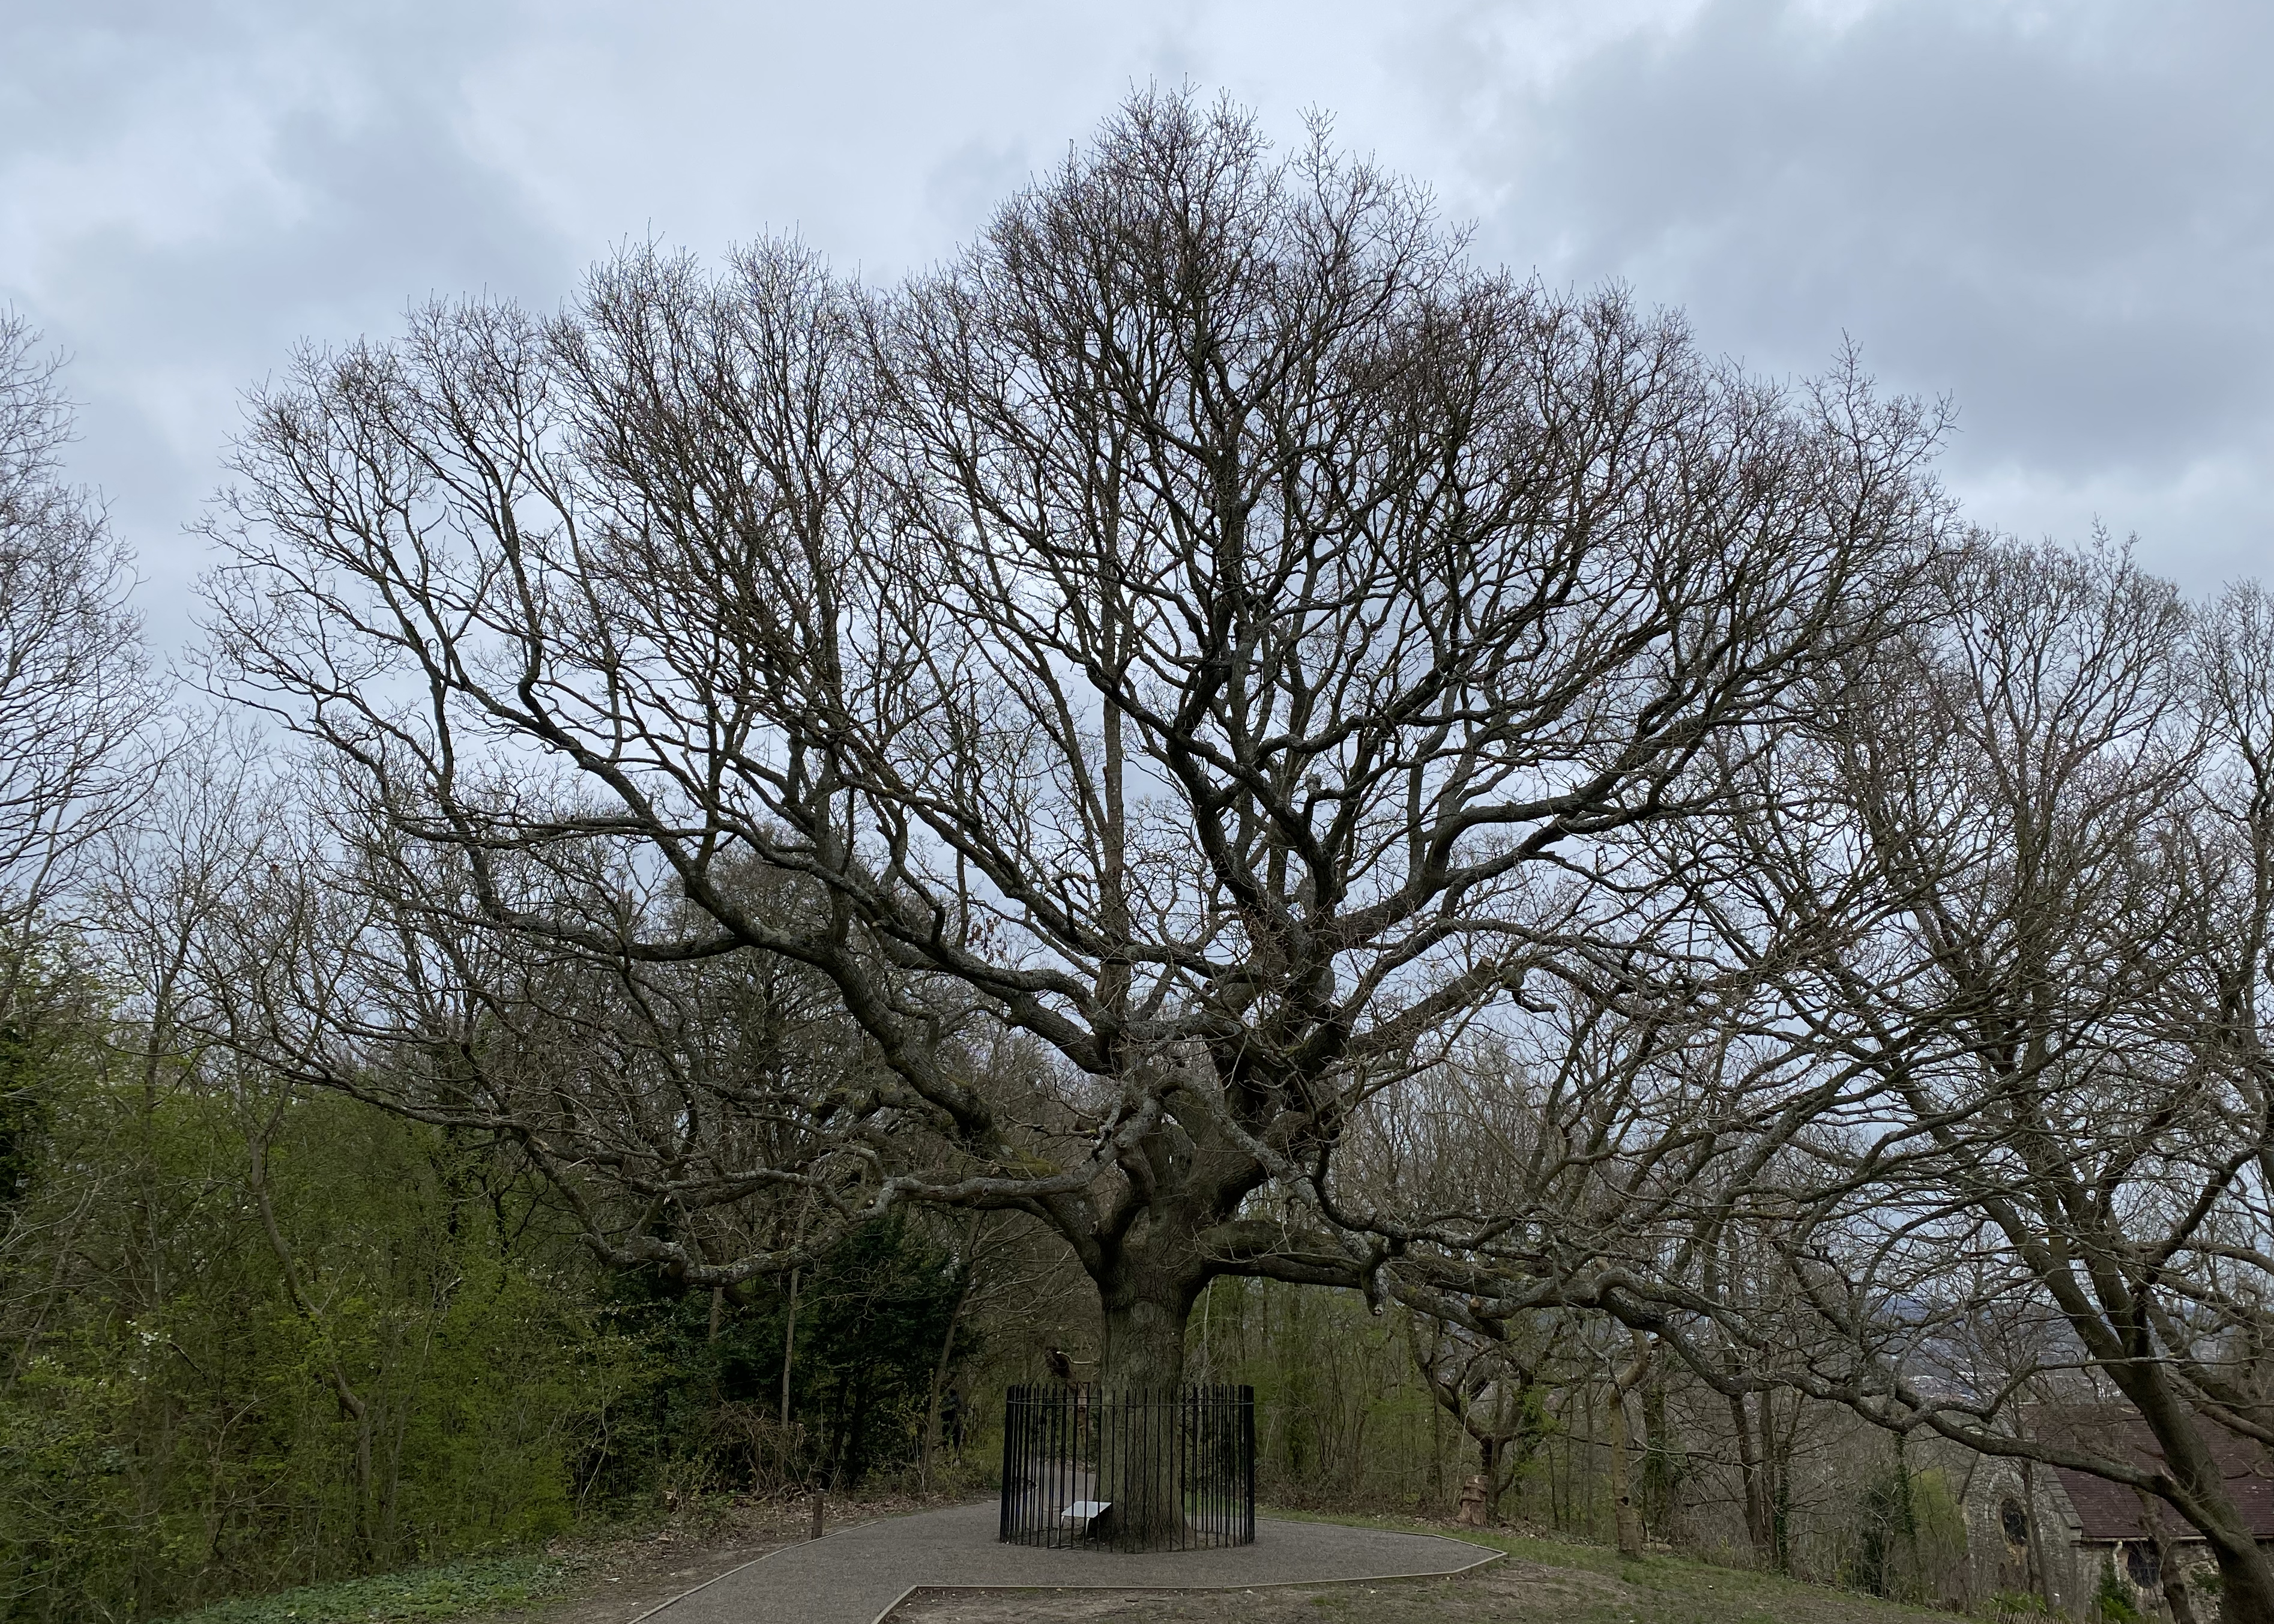 Full view of the tree with no leaves on any of the branches and grey sky